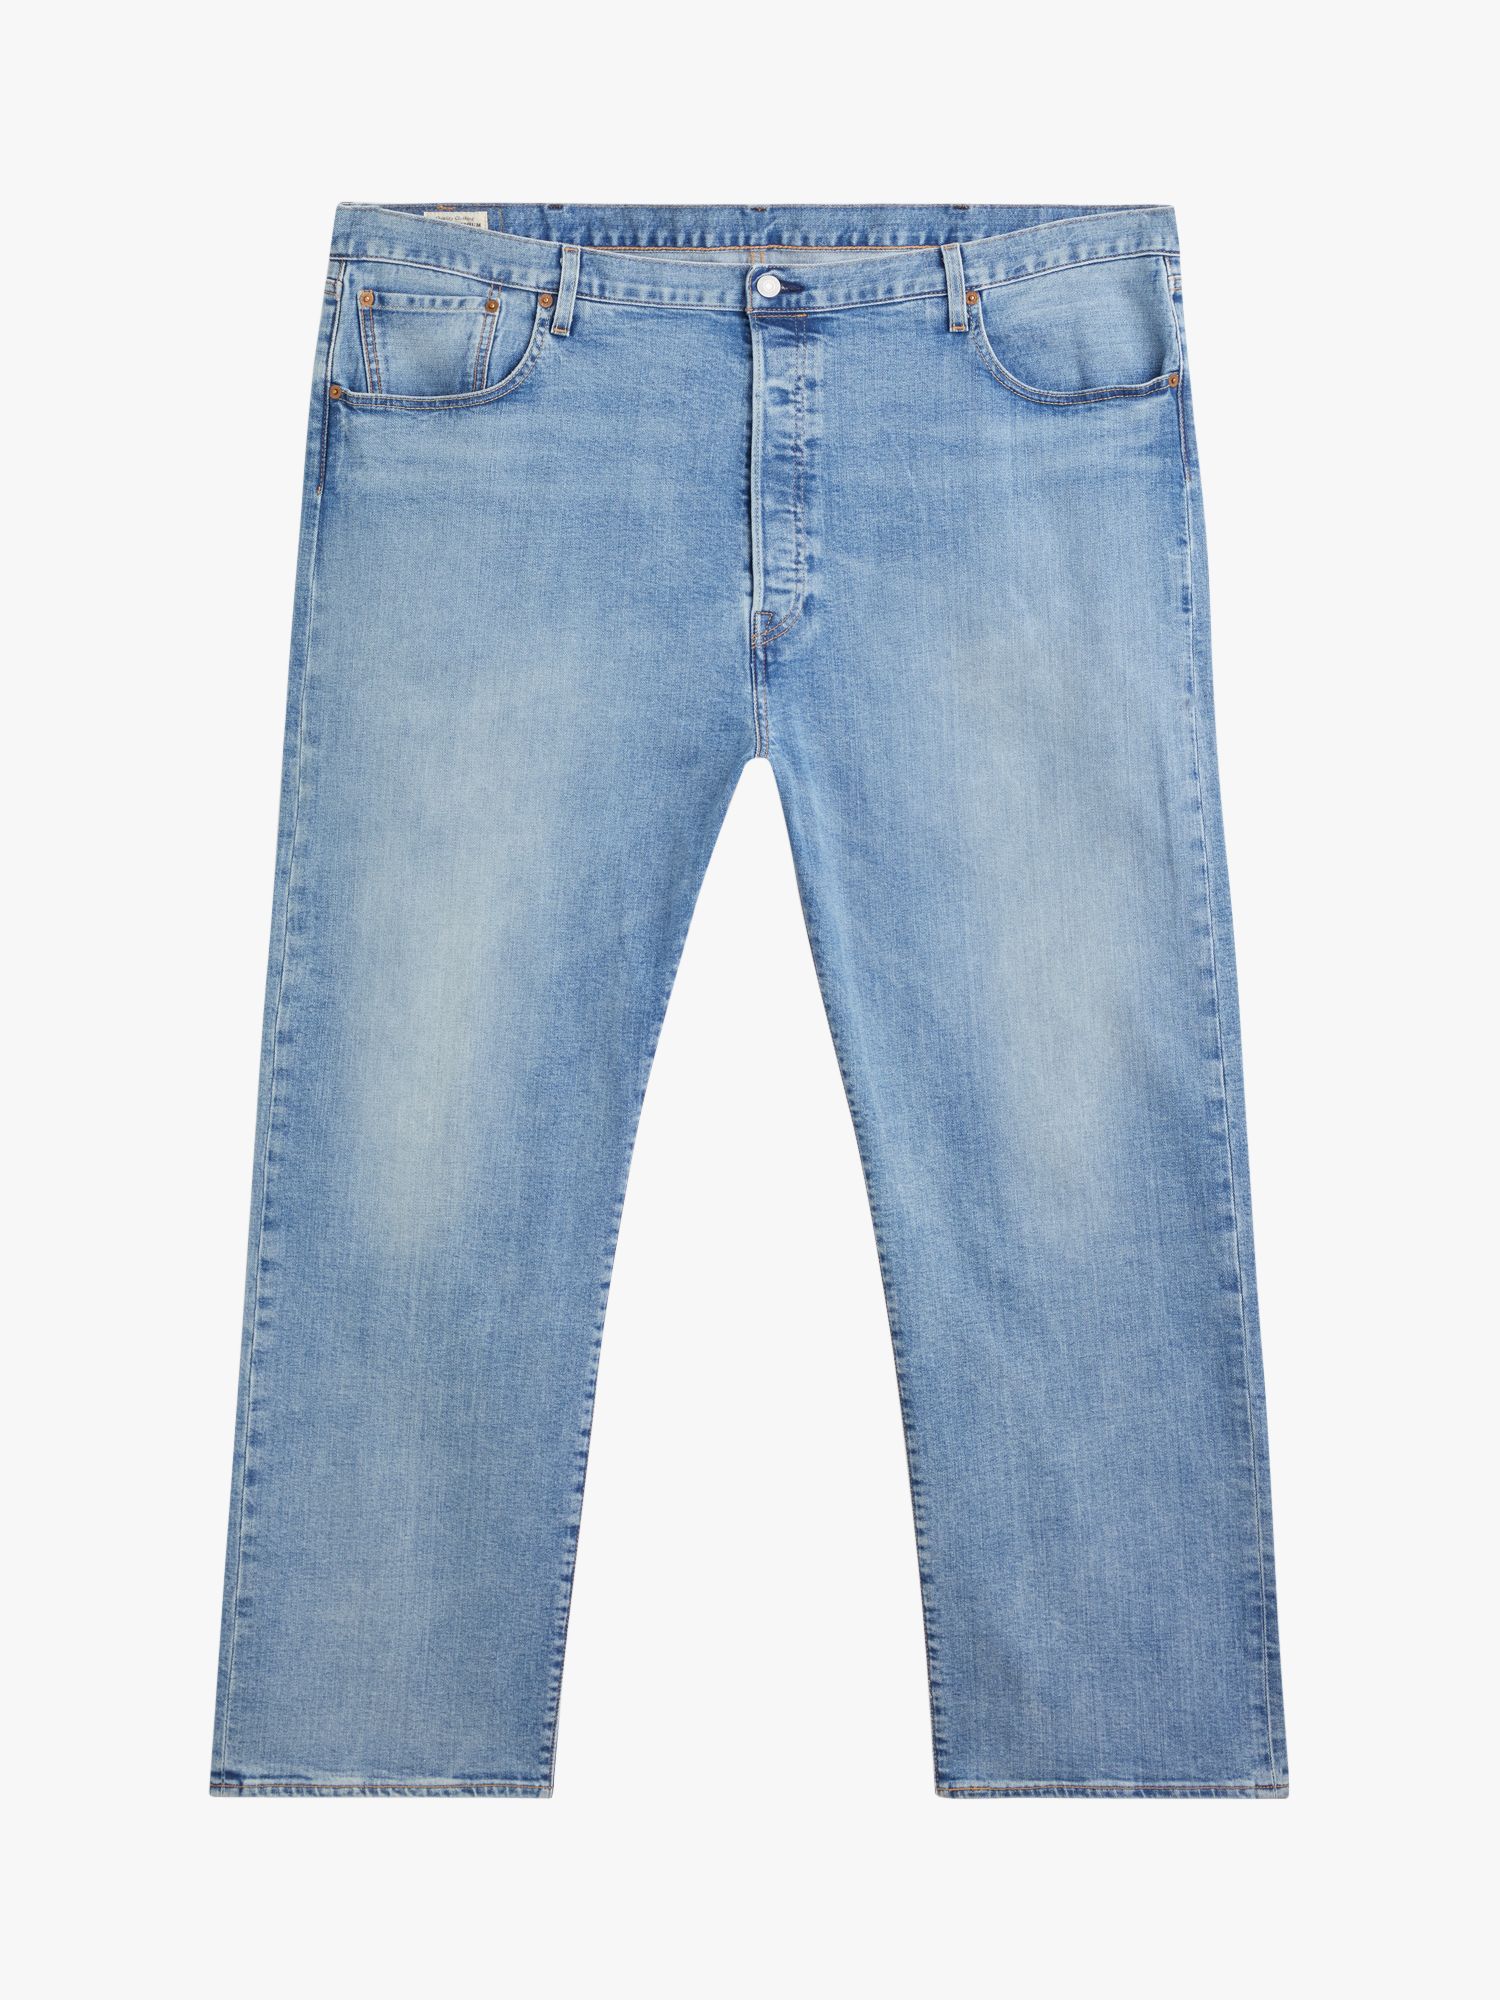 Levi's 501 I Call Your Name Jeans, Light Blue